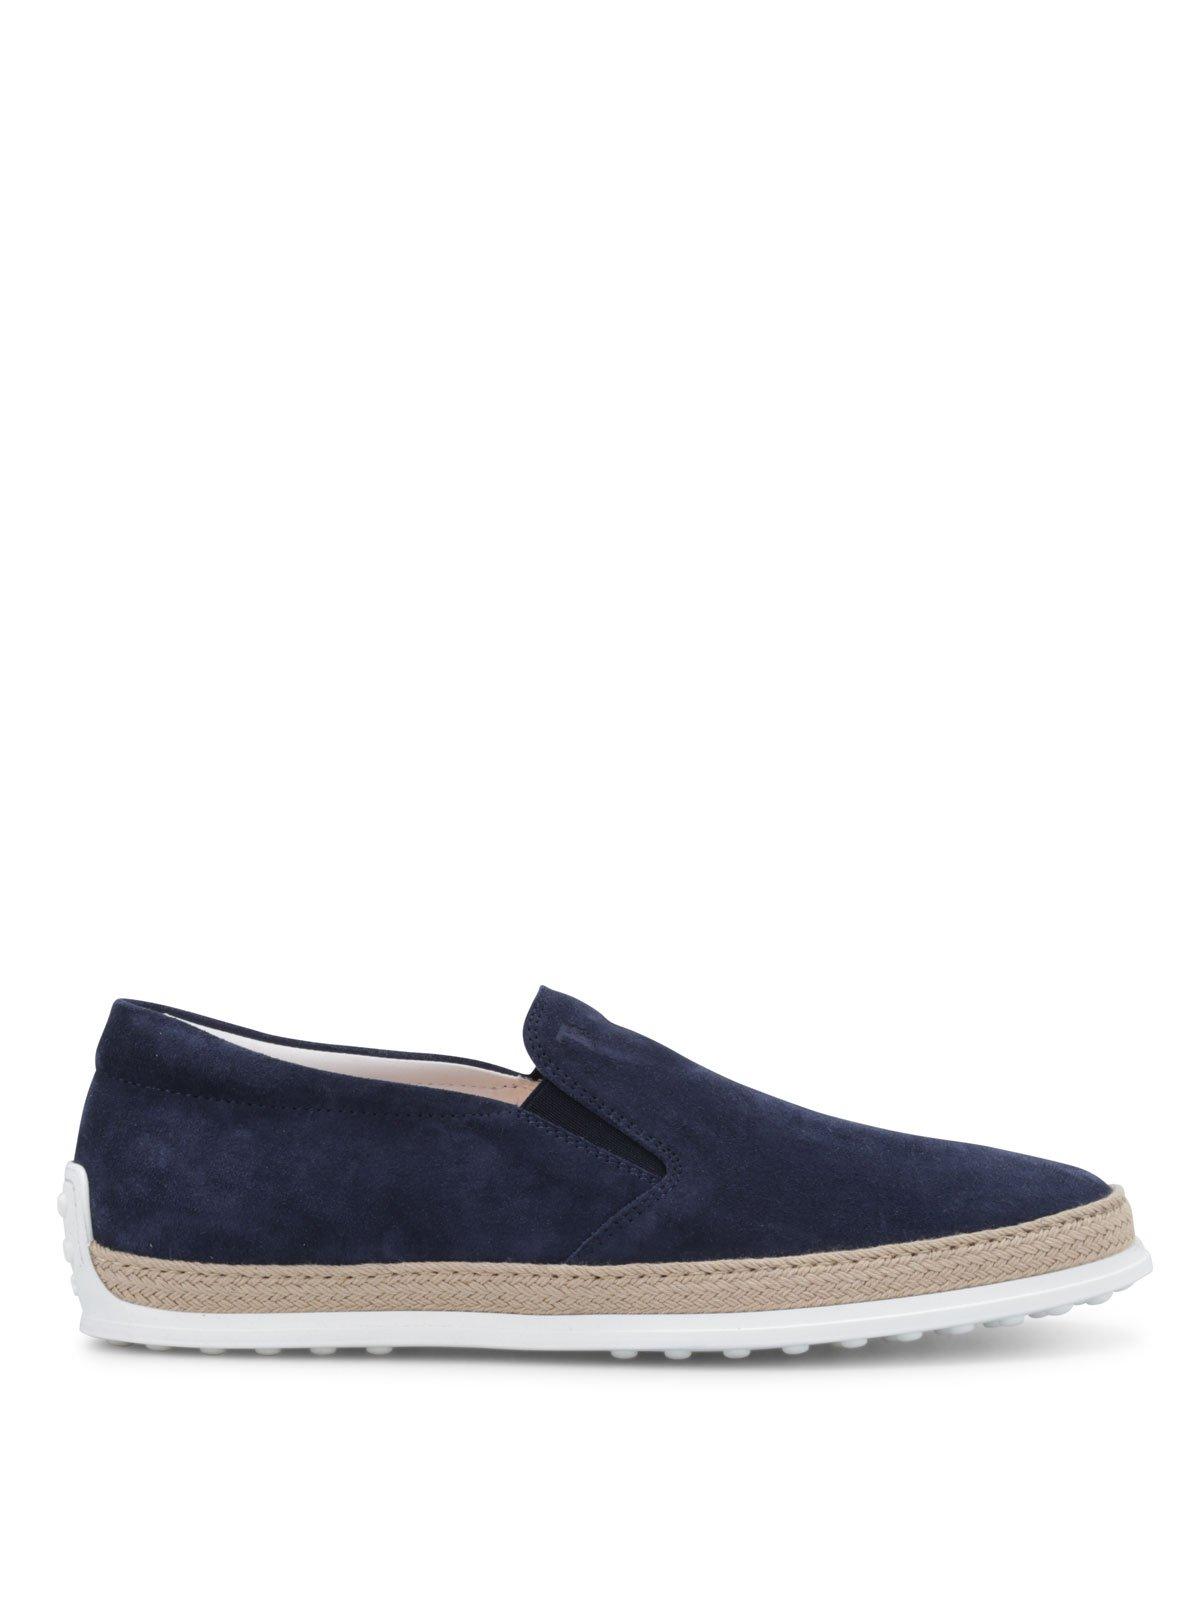 Tod's Leather Slip On Sneakers in Blue for Men - Lyst